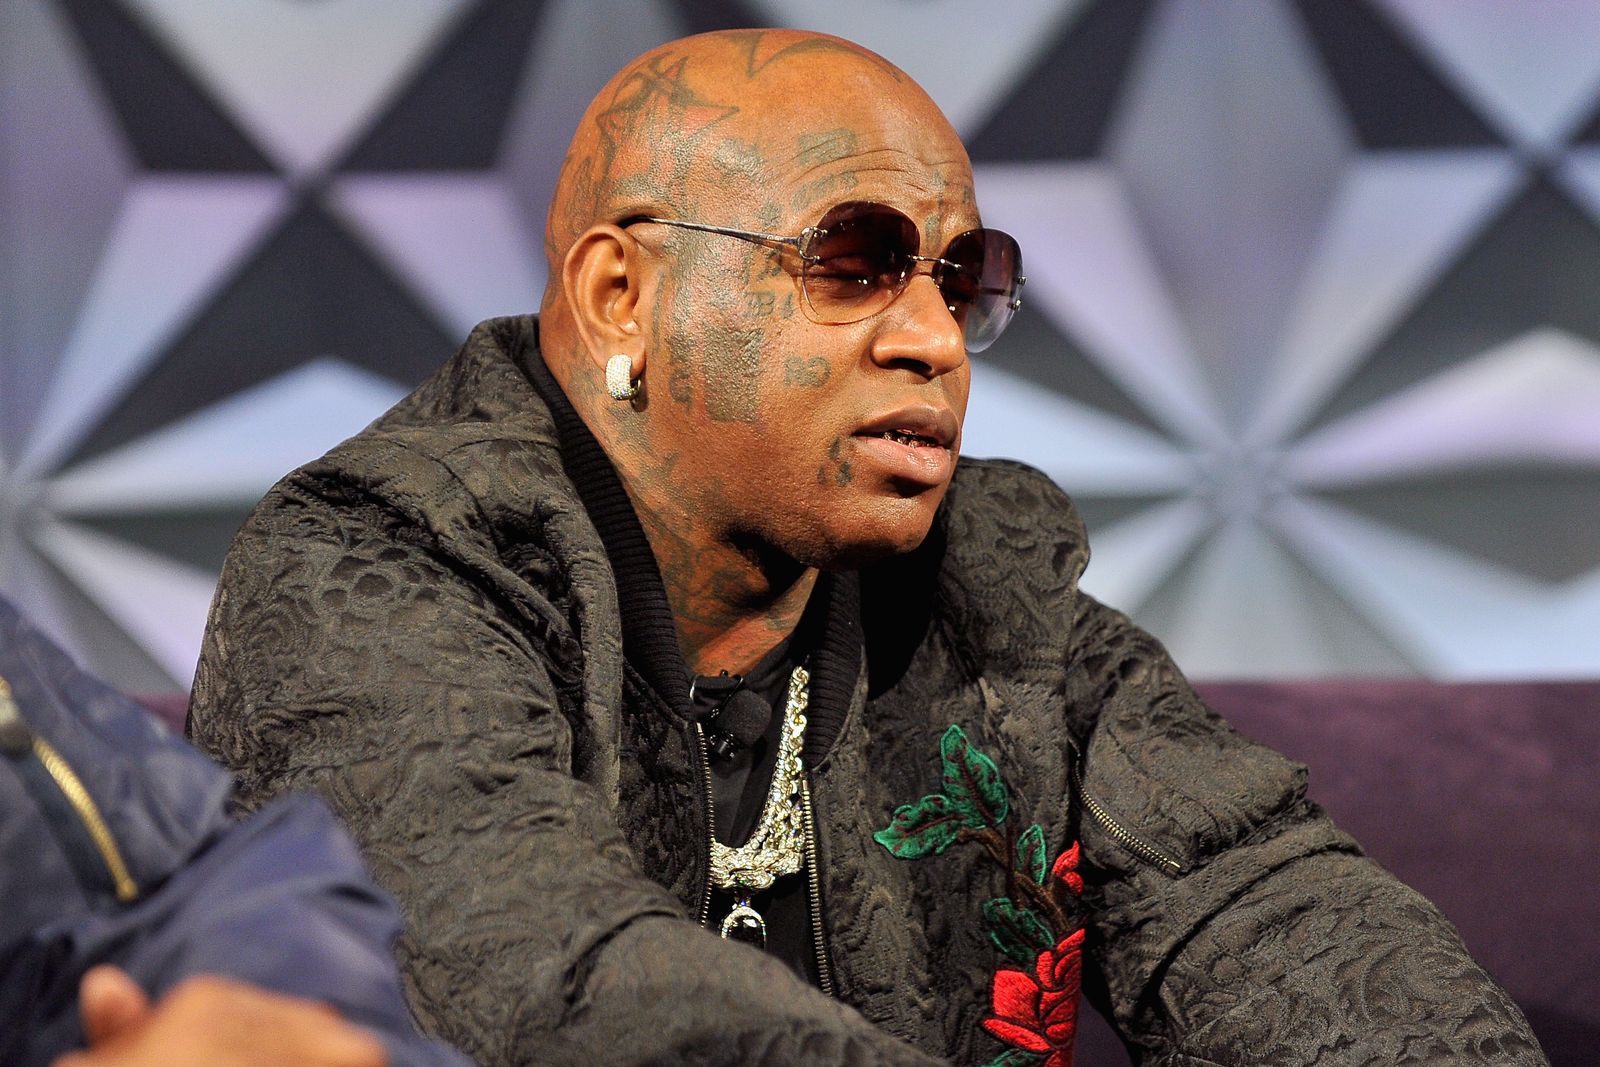 Birdman spoke at the Genius Talks sponsored by AT&T during the 2016 BET Experience on June 25, 2016 | Photo: Getty Images